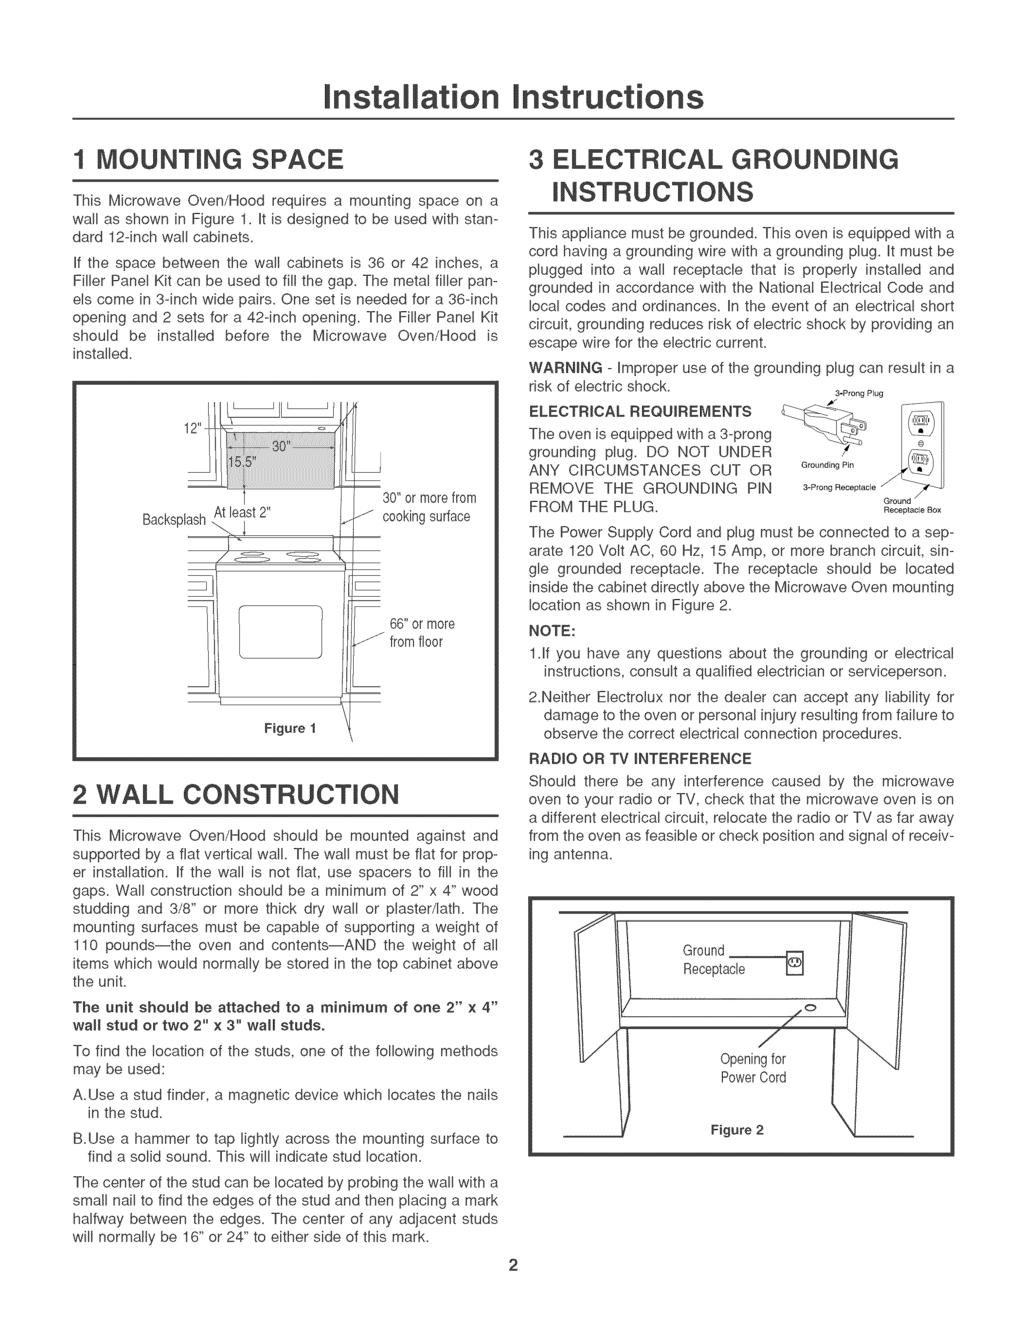 mnsta ation 1 MOUNTING SPACE This Microwave Oven/Hood requires a mounting space on a wall as shown in Figure 1. It is designed to be used with standard 12-inch wail cabinets.